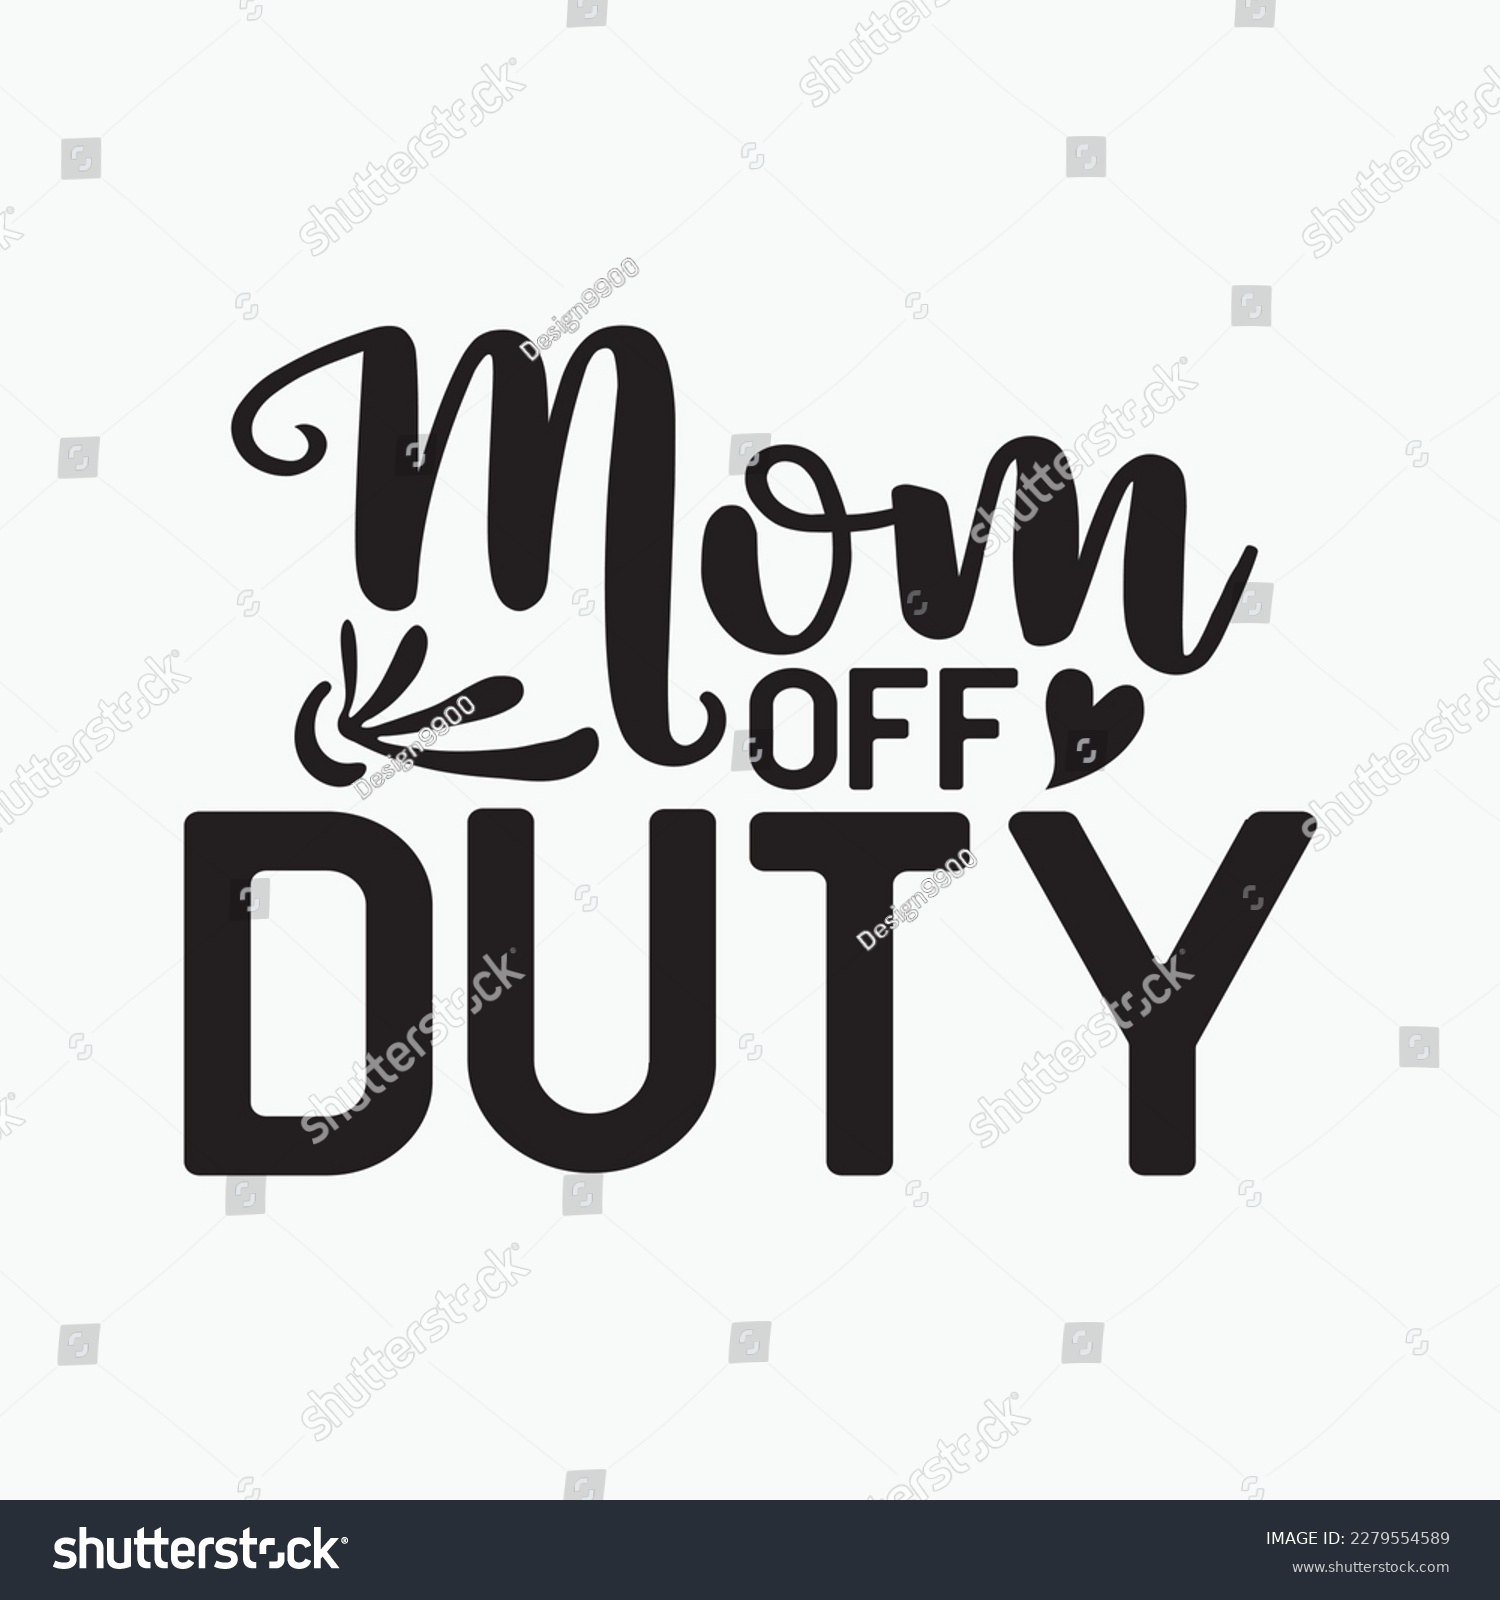 SVG of Funny Mother's Day Gift for Tired Moms Cute Mom Off Duty svg